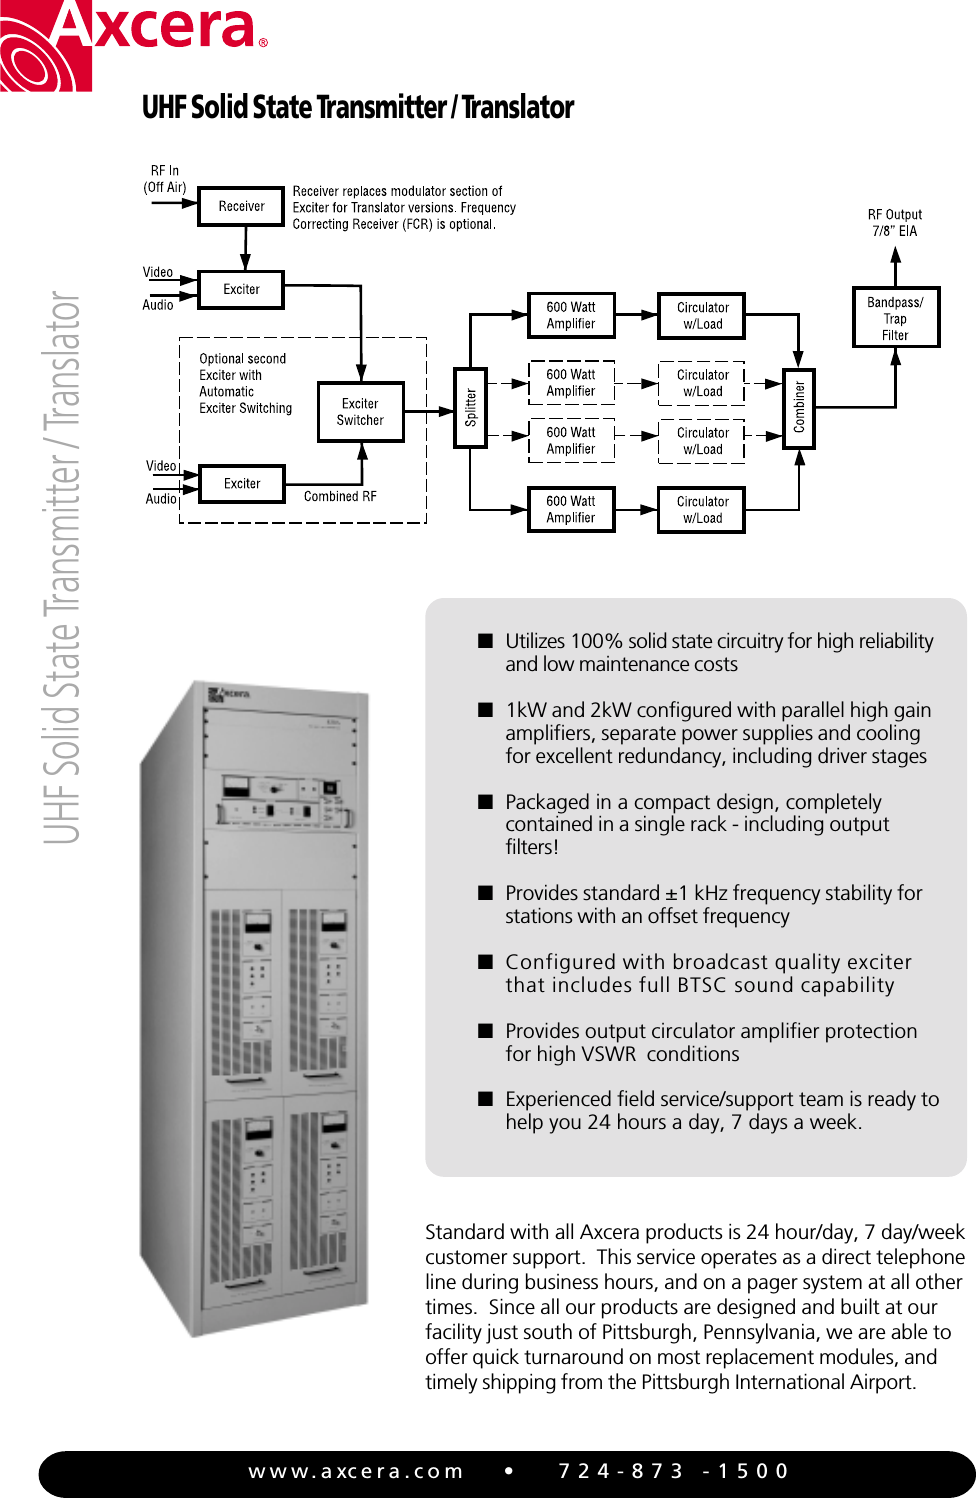 www.axcera.com   •    724-873 -1500UHF Solid State Transmitter / Translator■Utilizes 100% solid state circuitry for high reliabilityand low maintenance costs■1kW and 2kW configured with parallel high gainamplifiers, separate power supplies and coolingfor excellent redundancy, including driver stages■Packaged in a compact design, completelycontained in a single rack - including outputfilters!■Provides standard ±1 kHz frequency stability forstations with an offset frequency■Configured with broadcast quality exciterthat includes full BTSC sound capability■Provides output circulator amplifier protectionfor high VSWR  conditions■Experienced field service/support team is ready tohelp you 24 hours a day, 7 days a week.Standard with all Axcera products is 24 hour/day, 7 day/weekcustomer support.  This service operates as a direct telephoneline during business hours, and on a pager system at all othertimes.  Since all our products are designed and built at ourfacility just south of Pittsburgh, Pennsylvania, we are able tooffer quick turnaround on most replacement modules, andtimely shipping from the Pittsburgh International Airport.UHF Solid State Transmitter / Translator